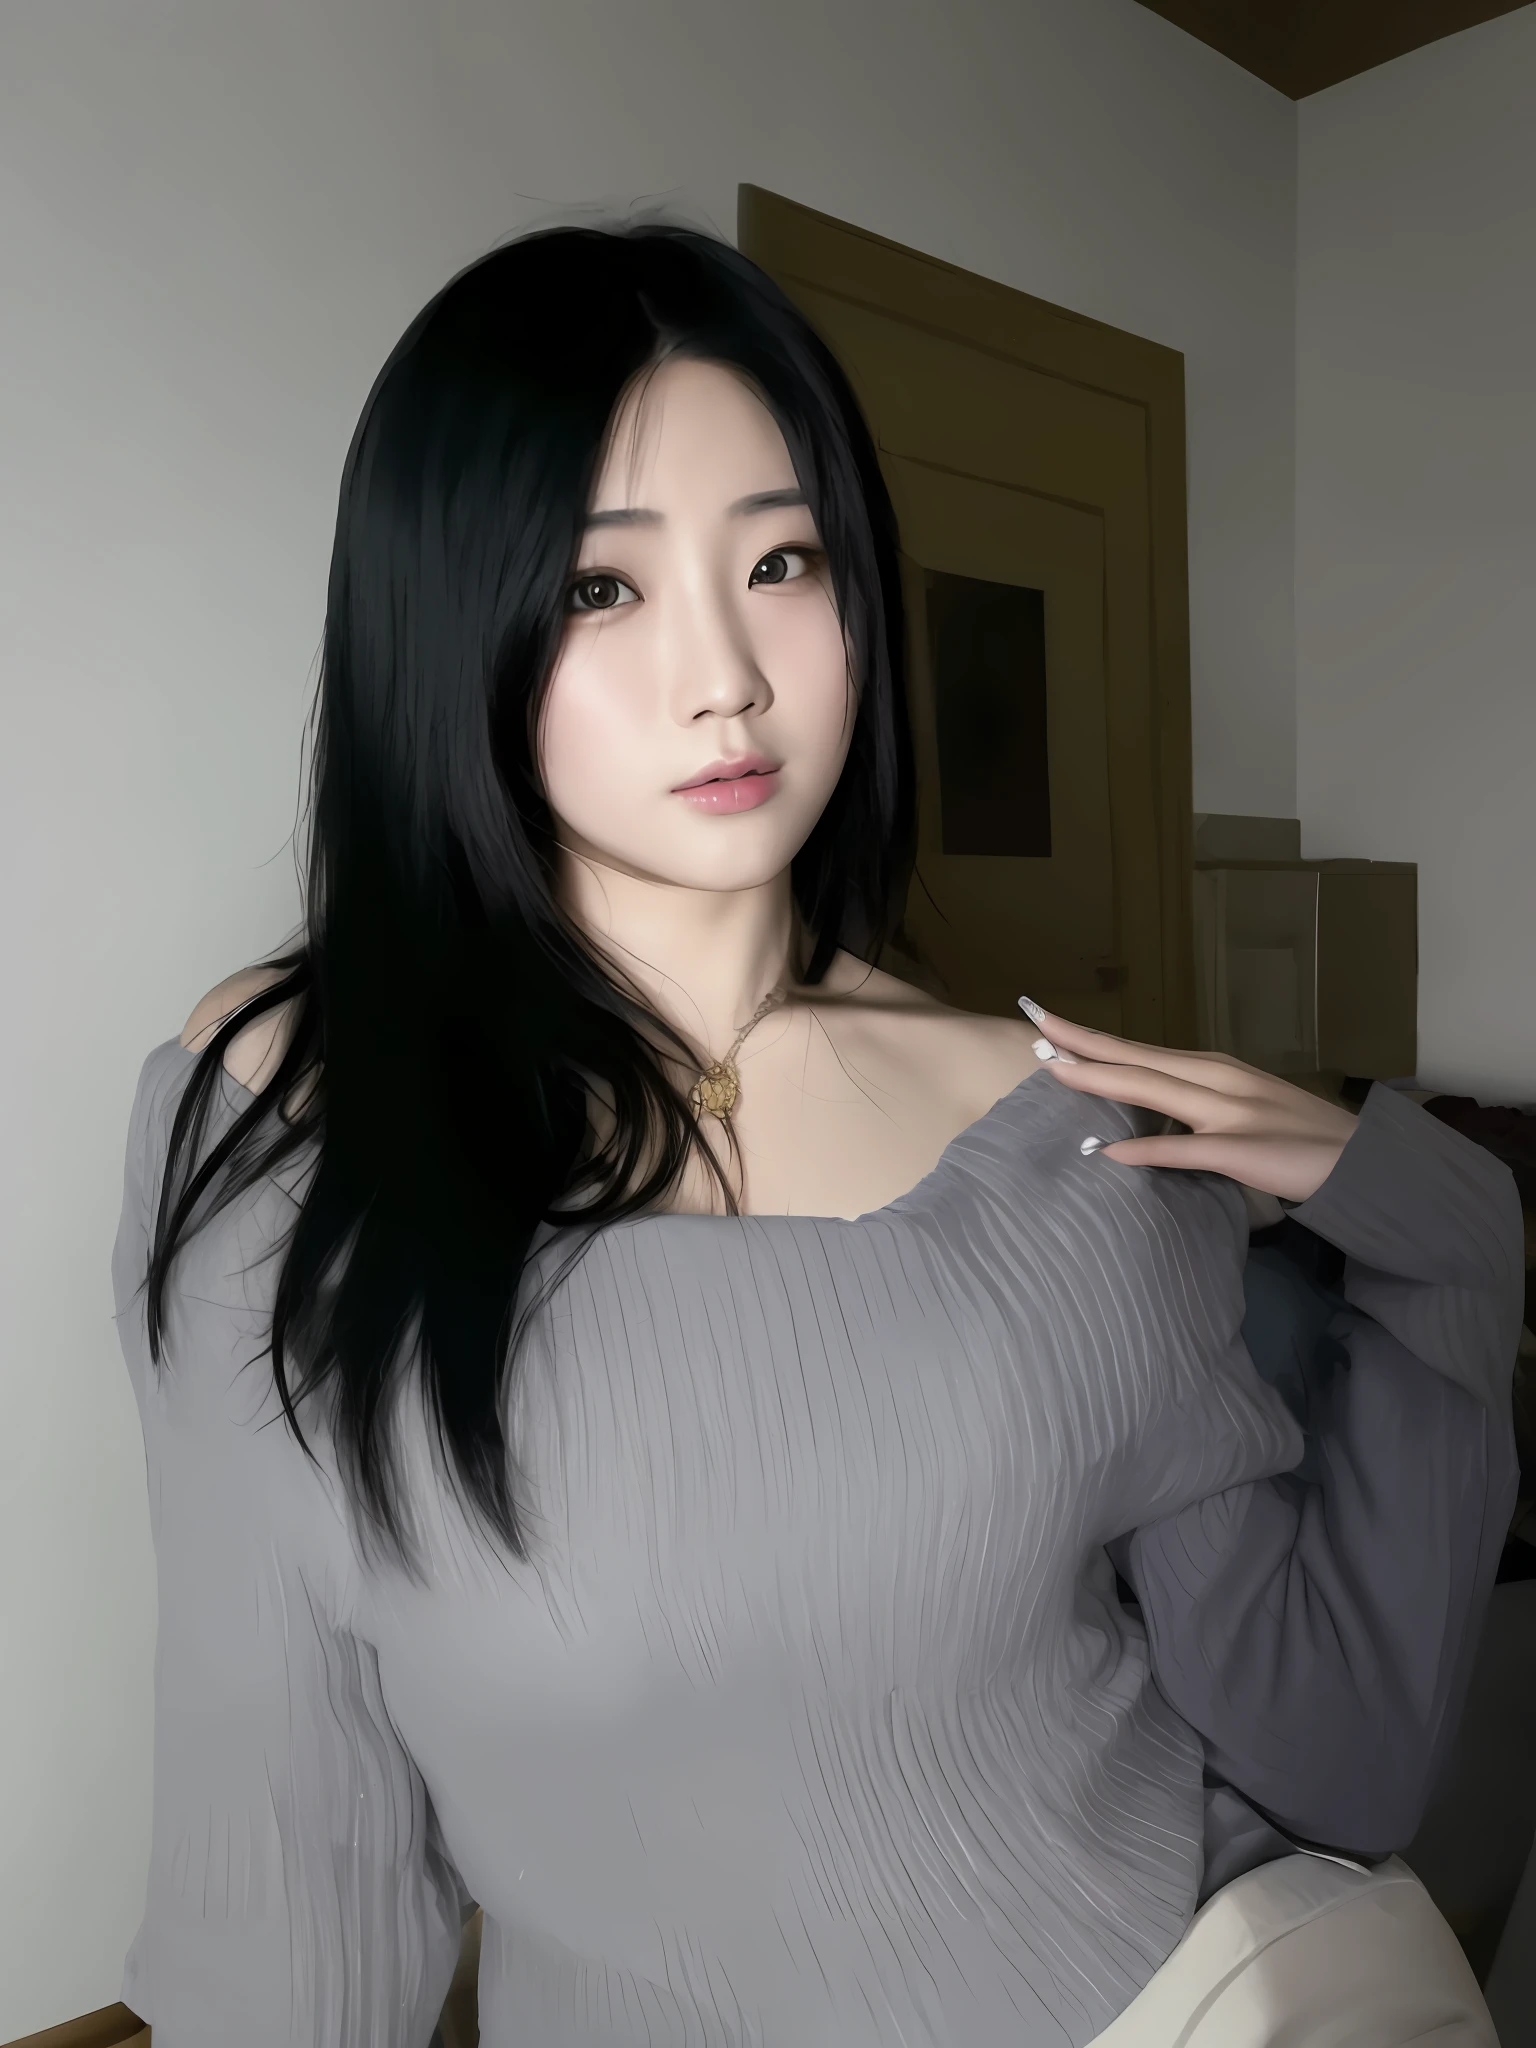 araffed asian woman with long black hair posing for a picture, korean girl, 18 years old, 2 2 years old, korean woman, 19-year-old girl, 21 years old, asian girl, chinese girl, 2 3 years old, 1 6 years old, 2 7 years old, 2 8 years old, xintong chen